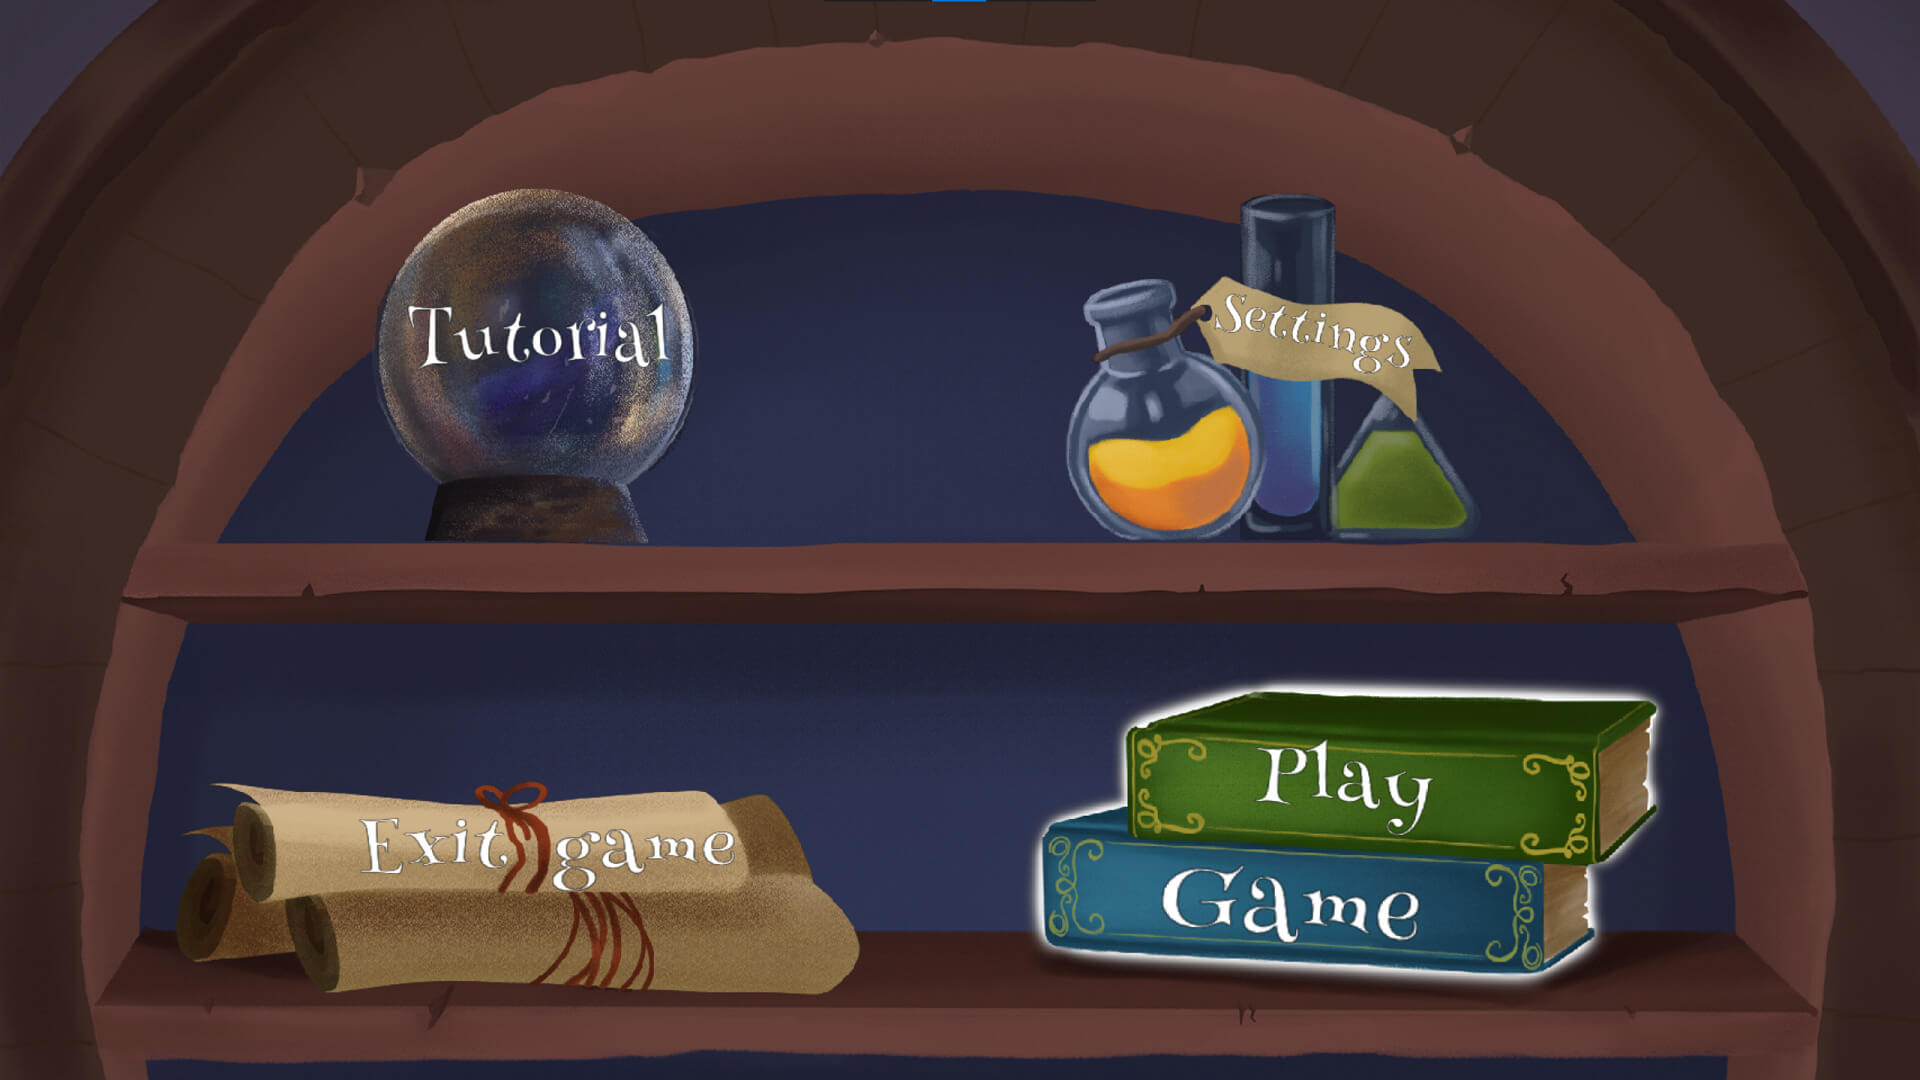 The game&#039;s &#039;menu&#039; screen is displayed with various options located on objects such as a crystal ball, potions, rolled-up scrolls, and books.